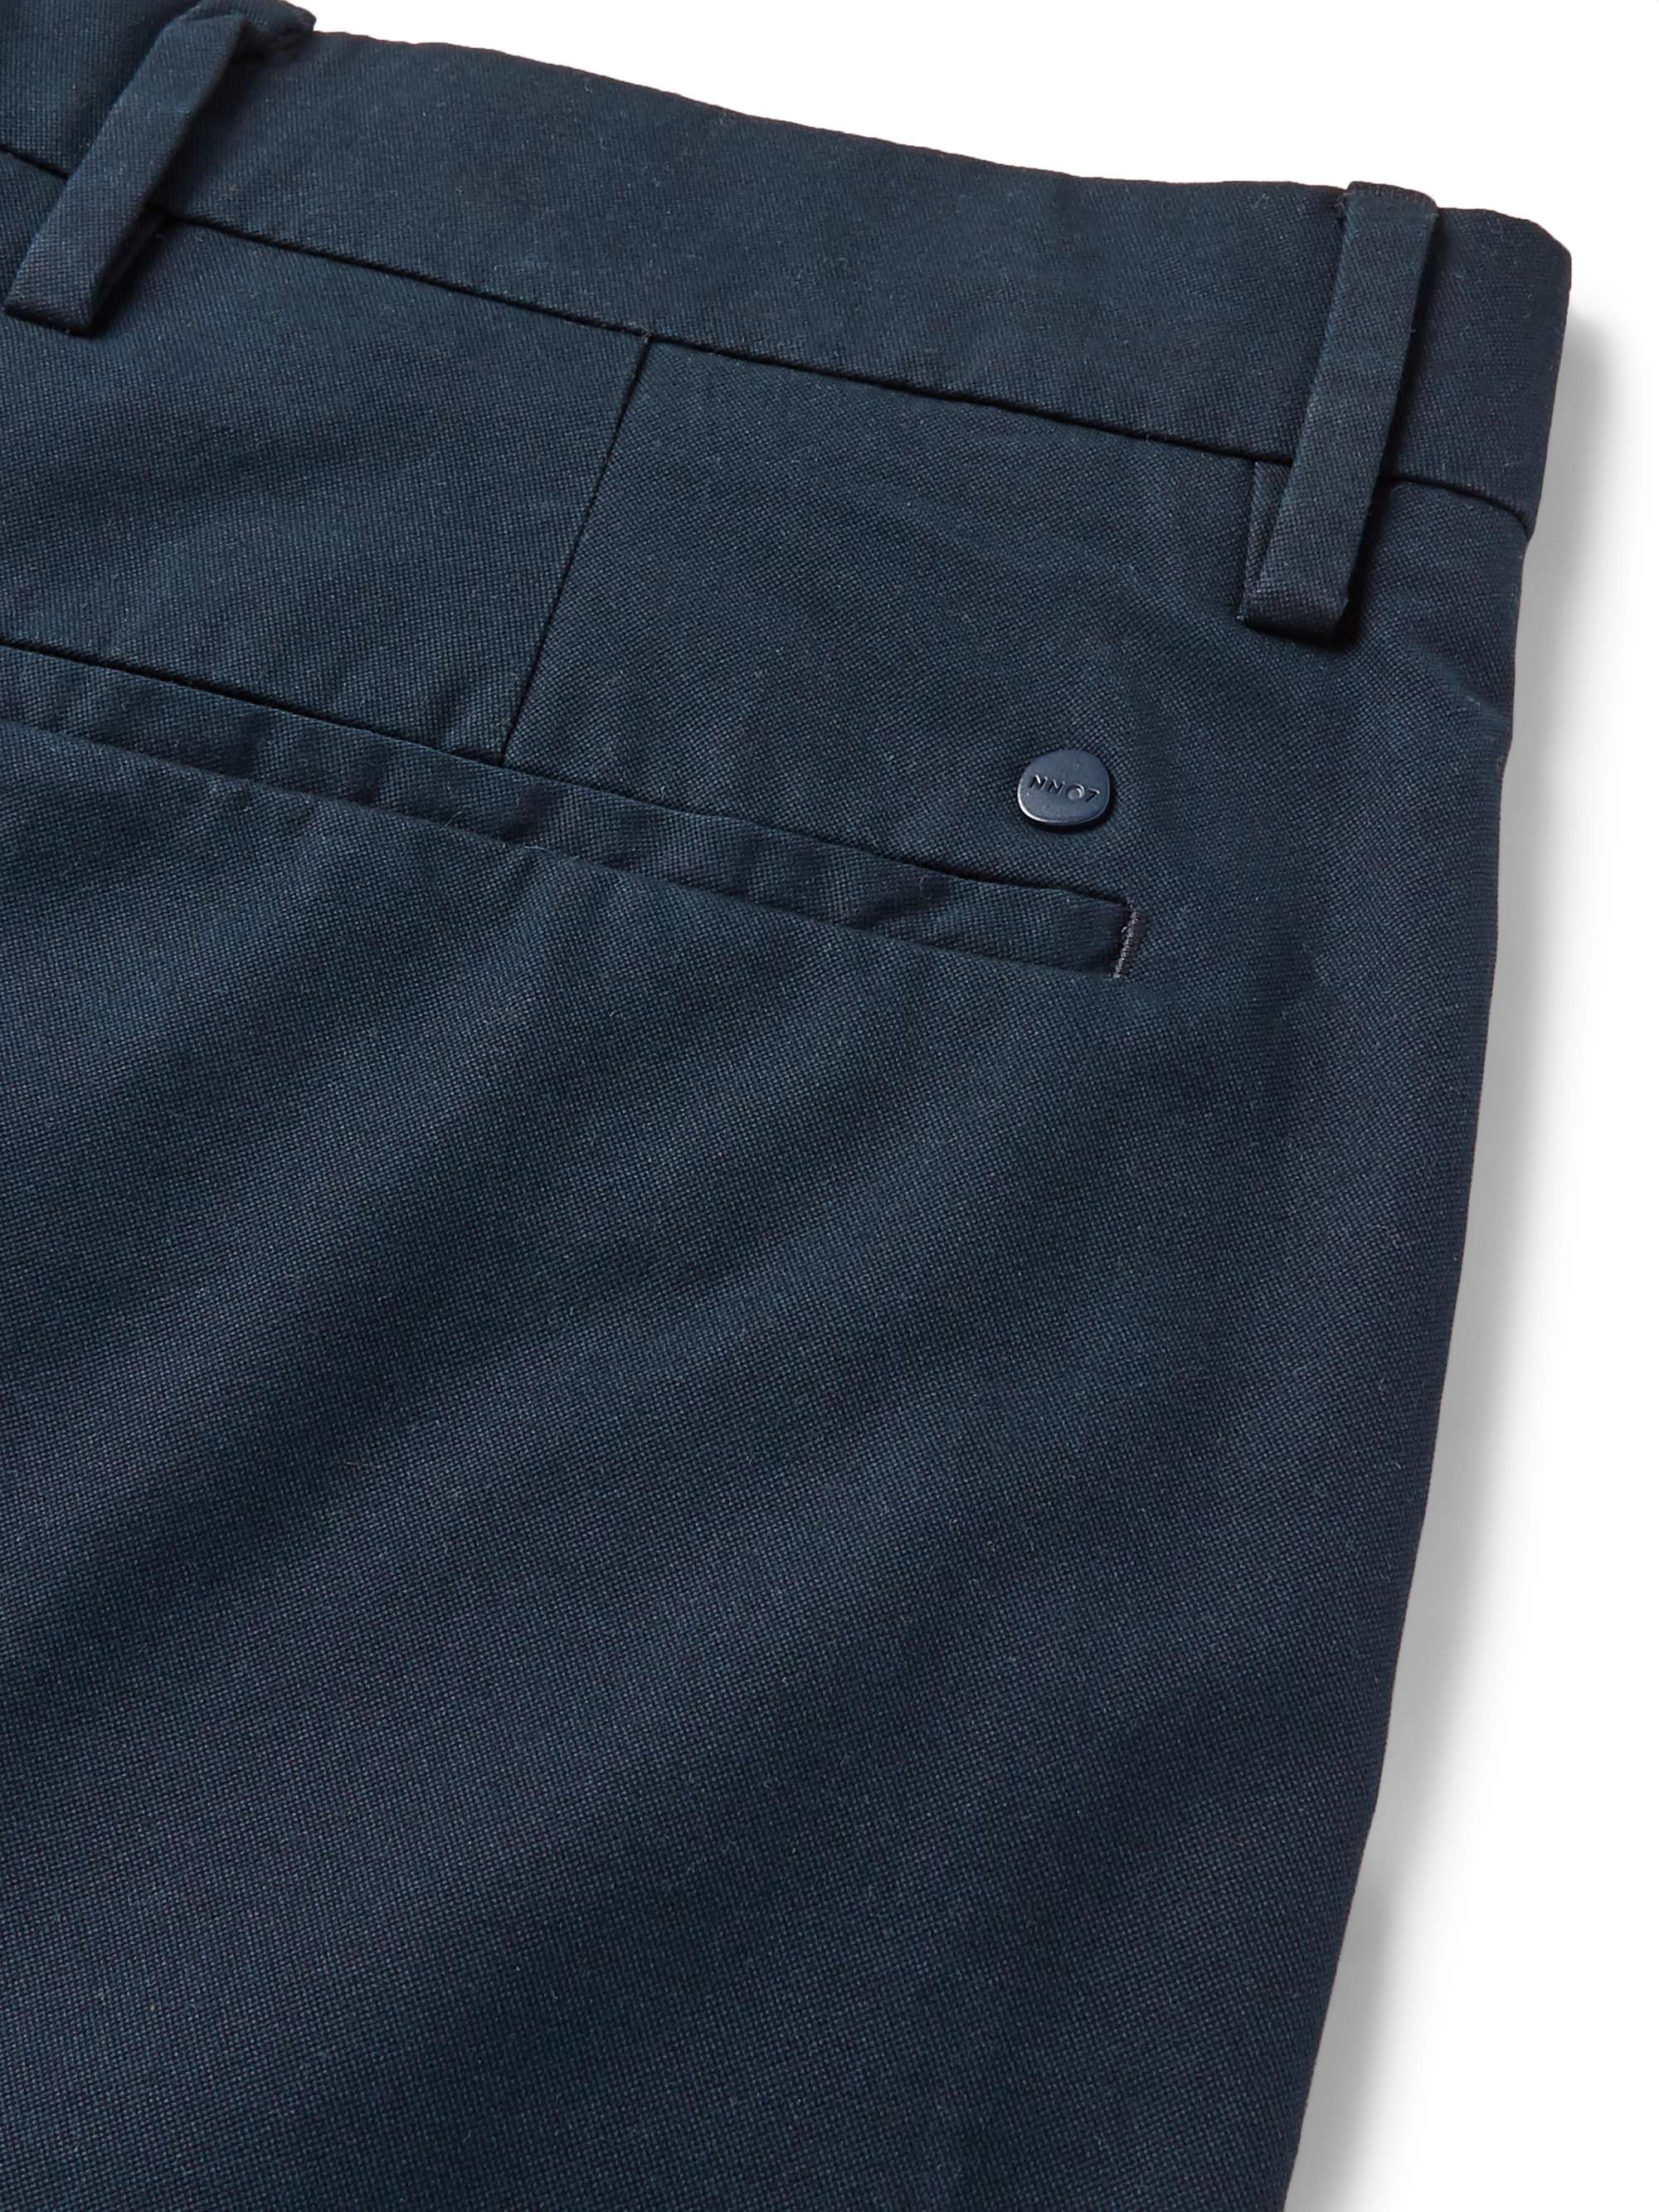 NN07 Theo Tapered Cotton-Blend Twill Chinos